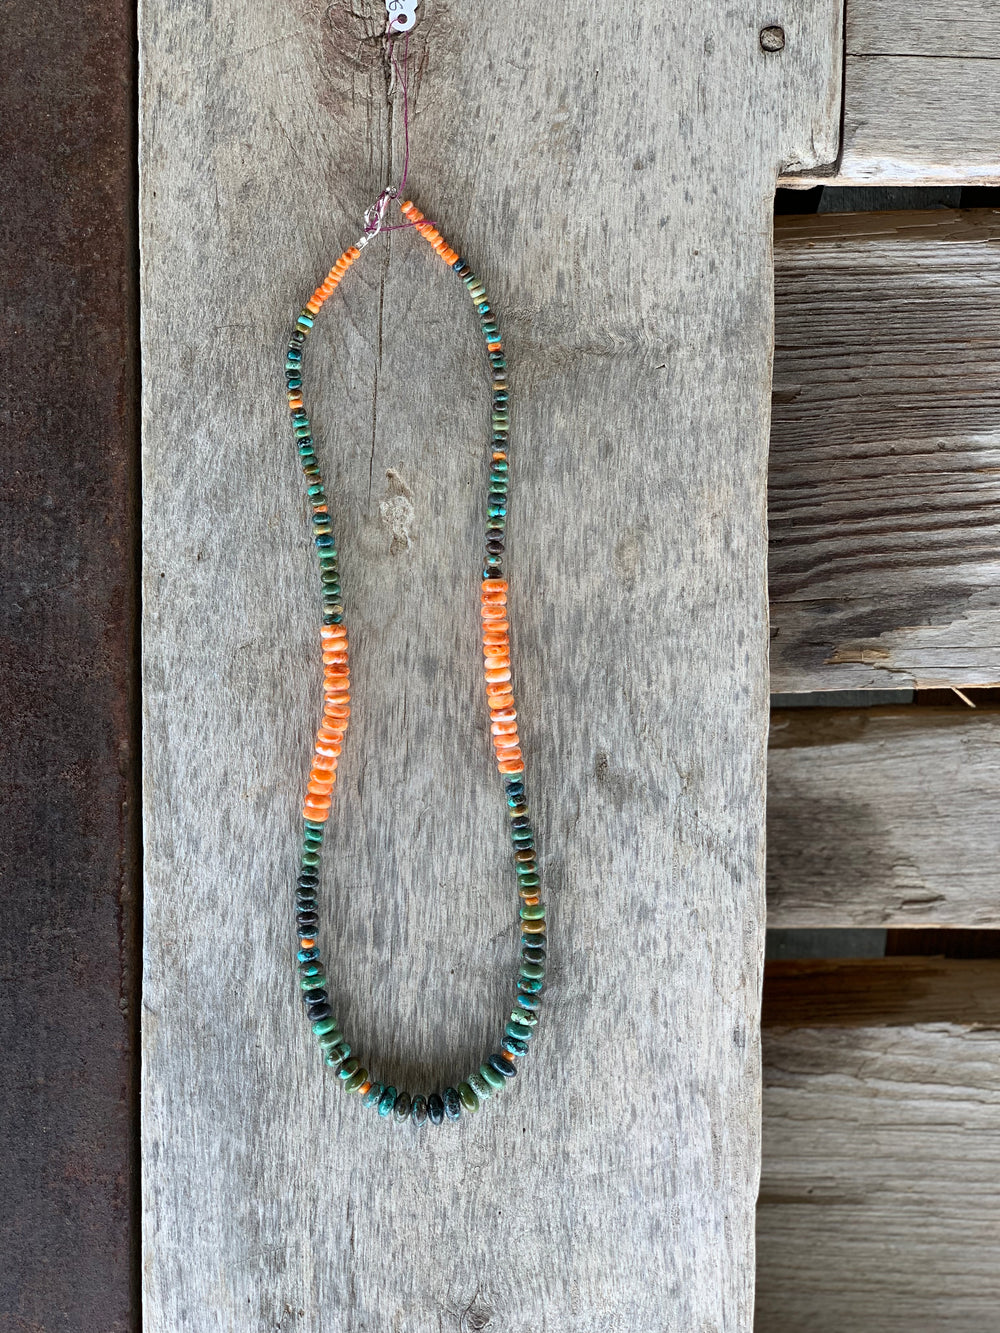 24” Necklace | Graduated Turquoise and Spiny Oyster Rondells.